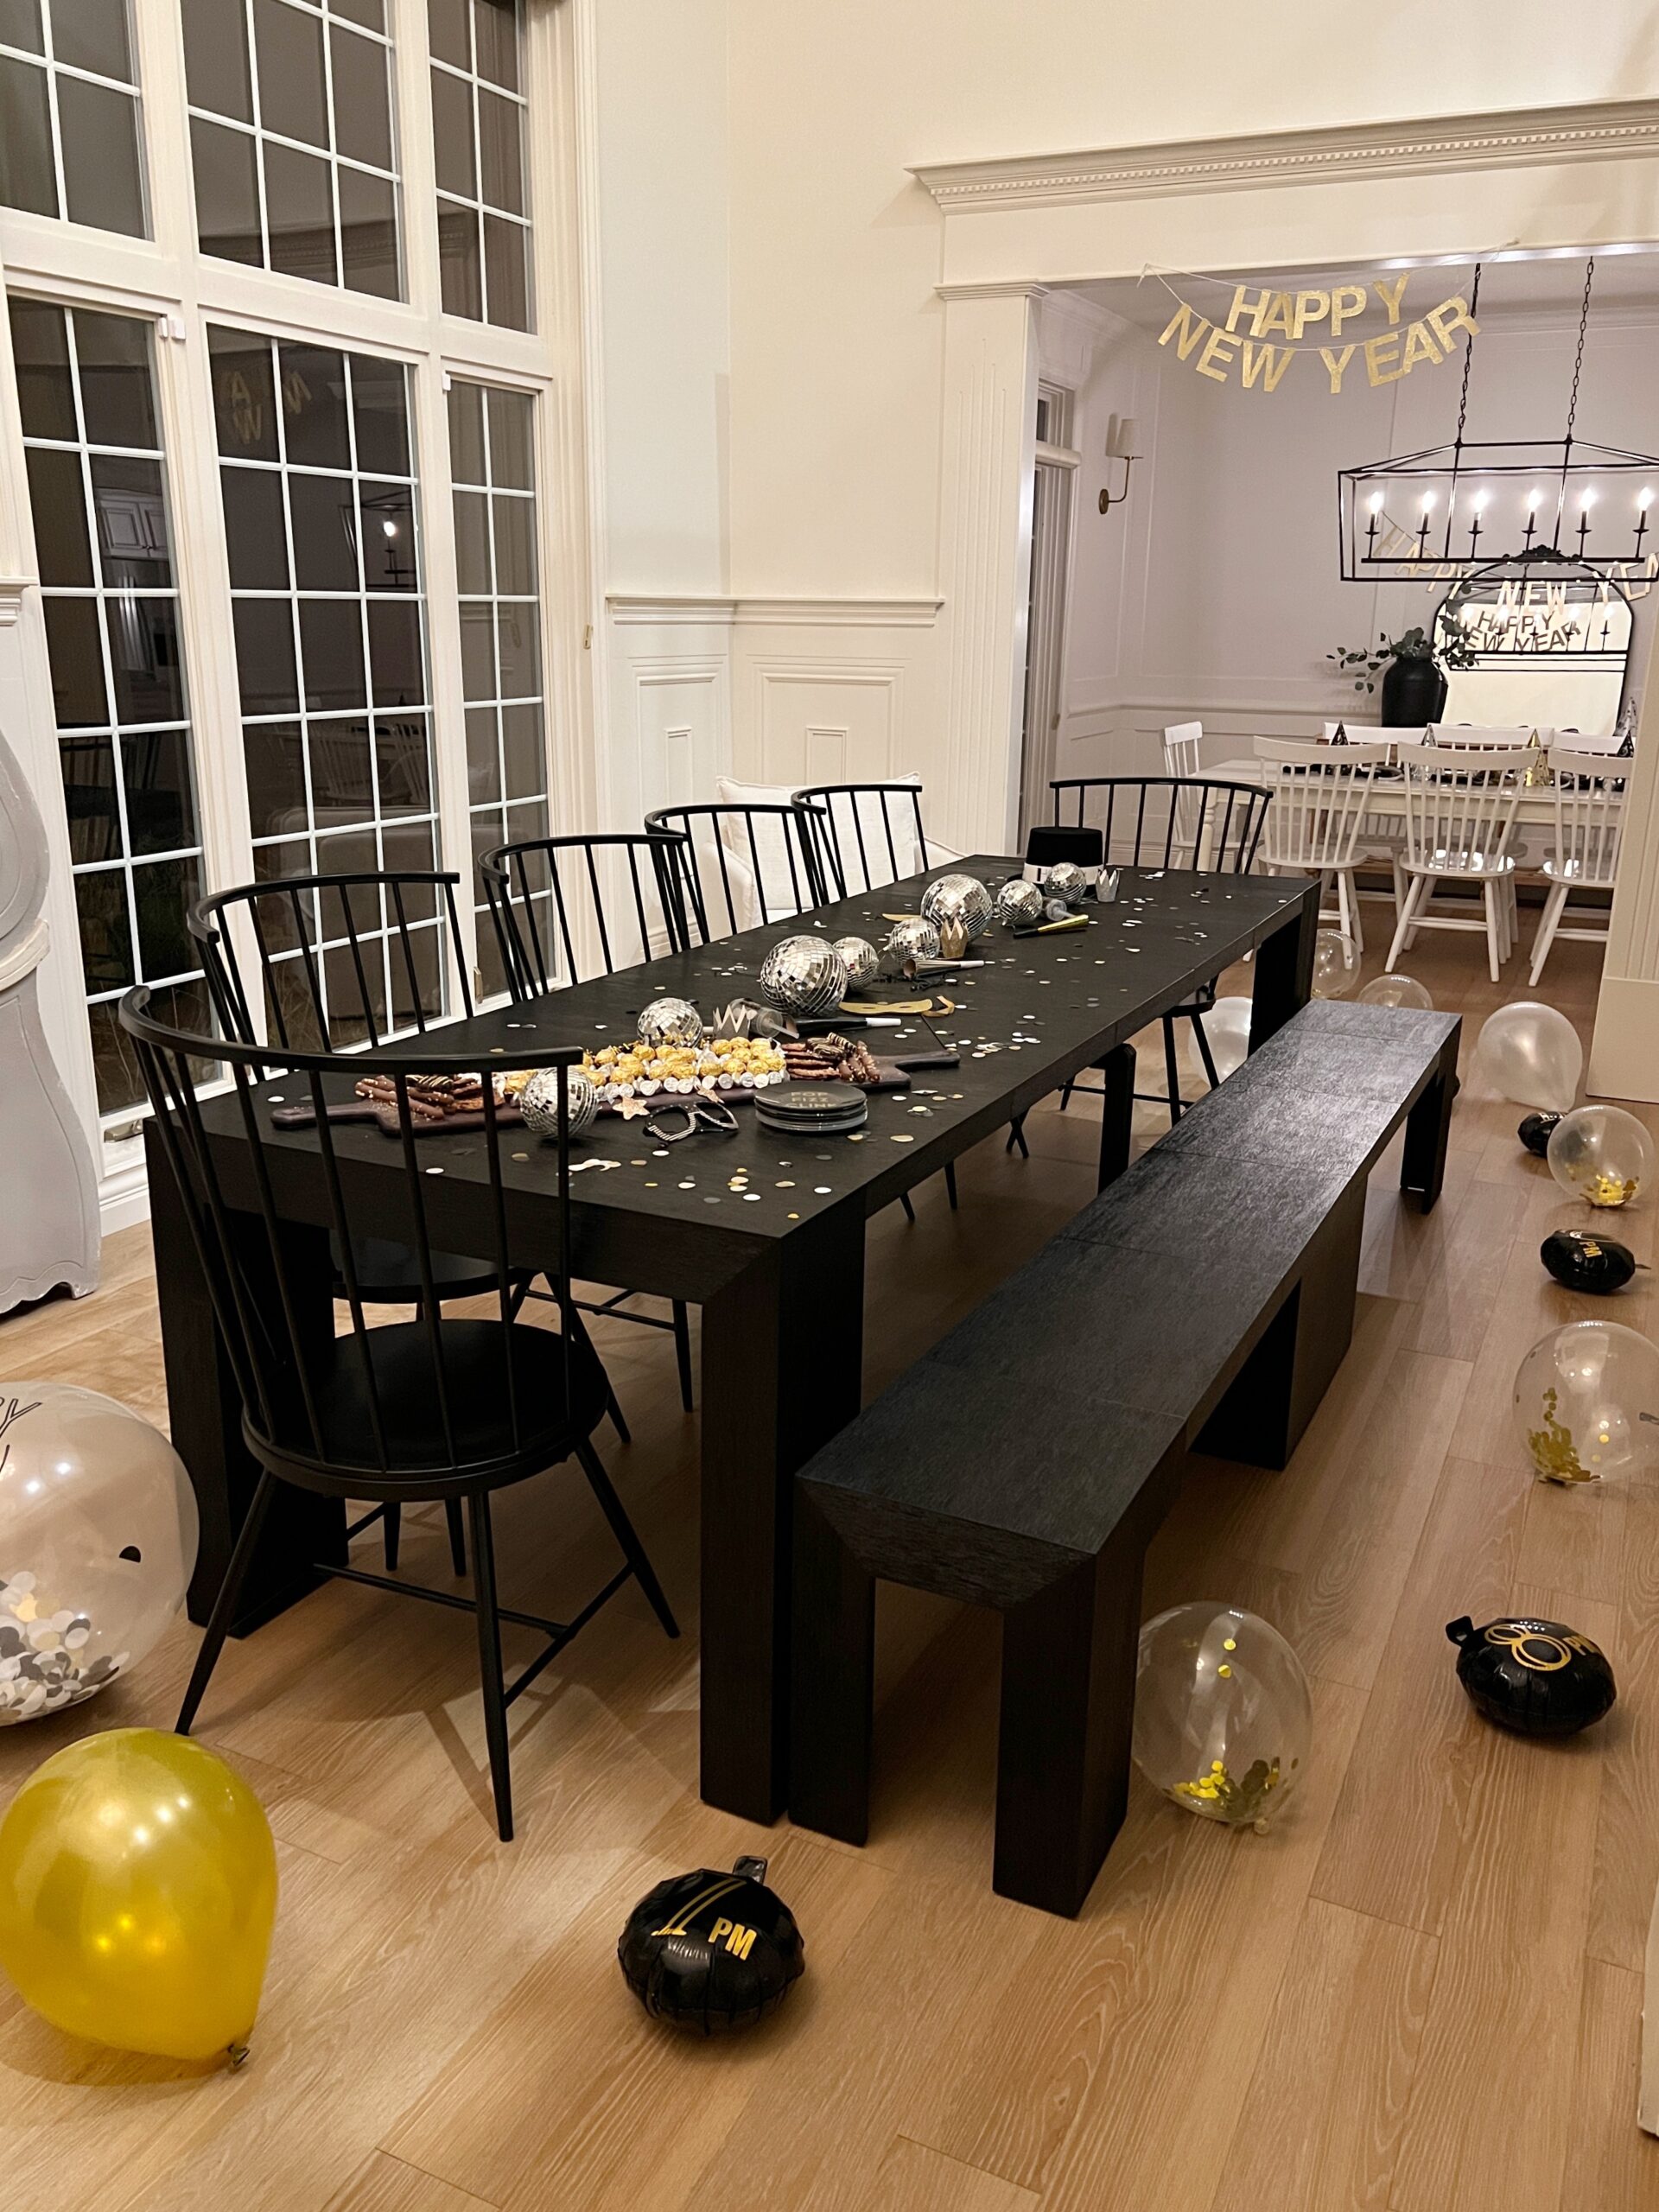 New Years Eve Games & Decor Ideas